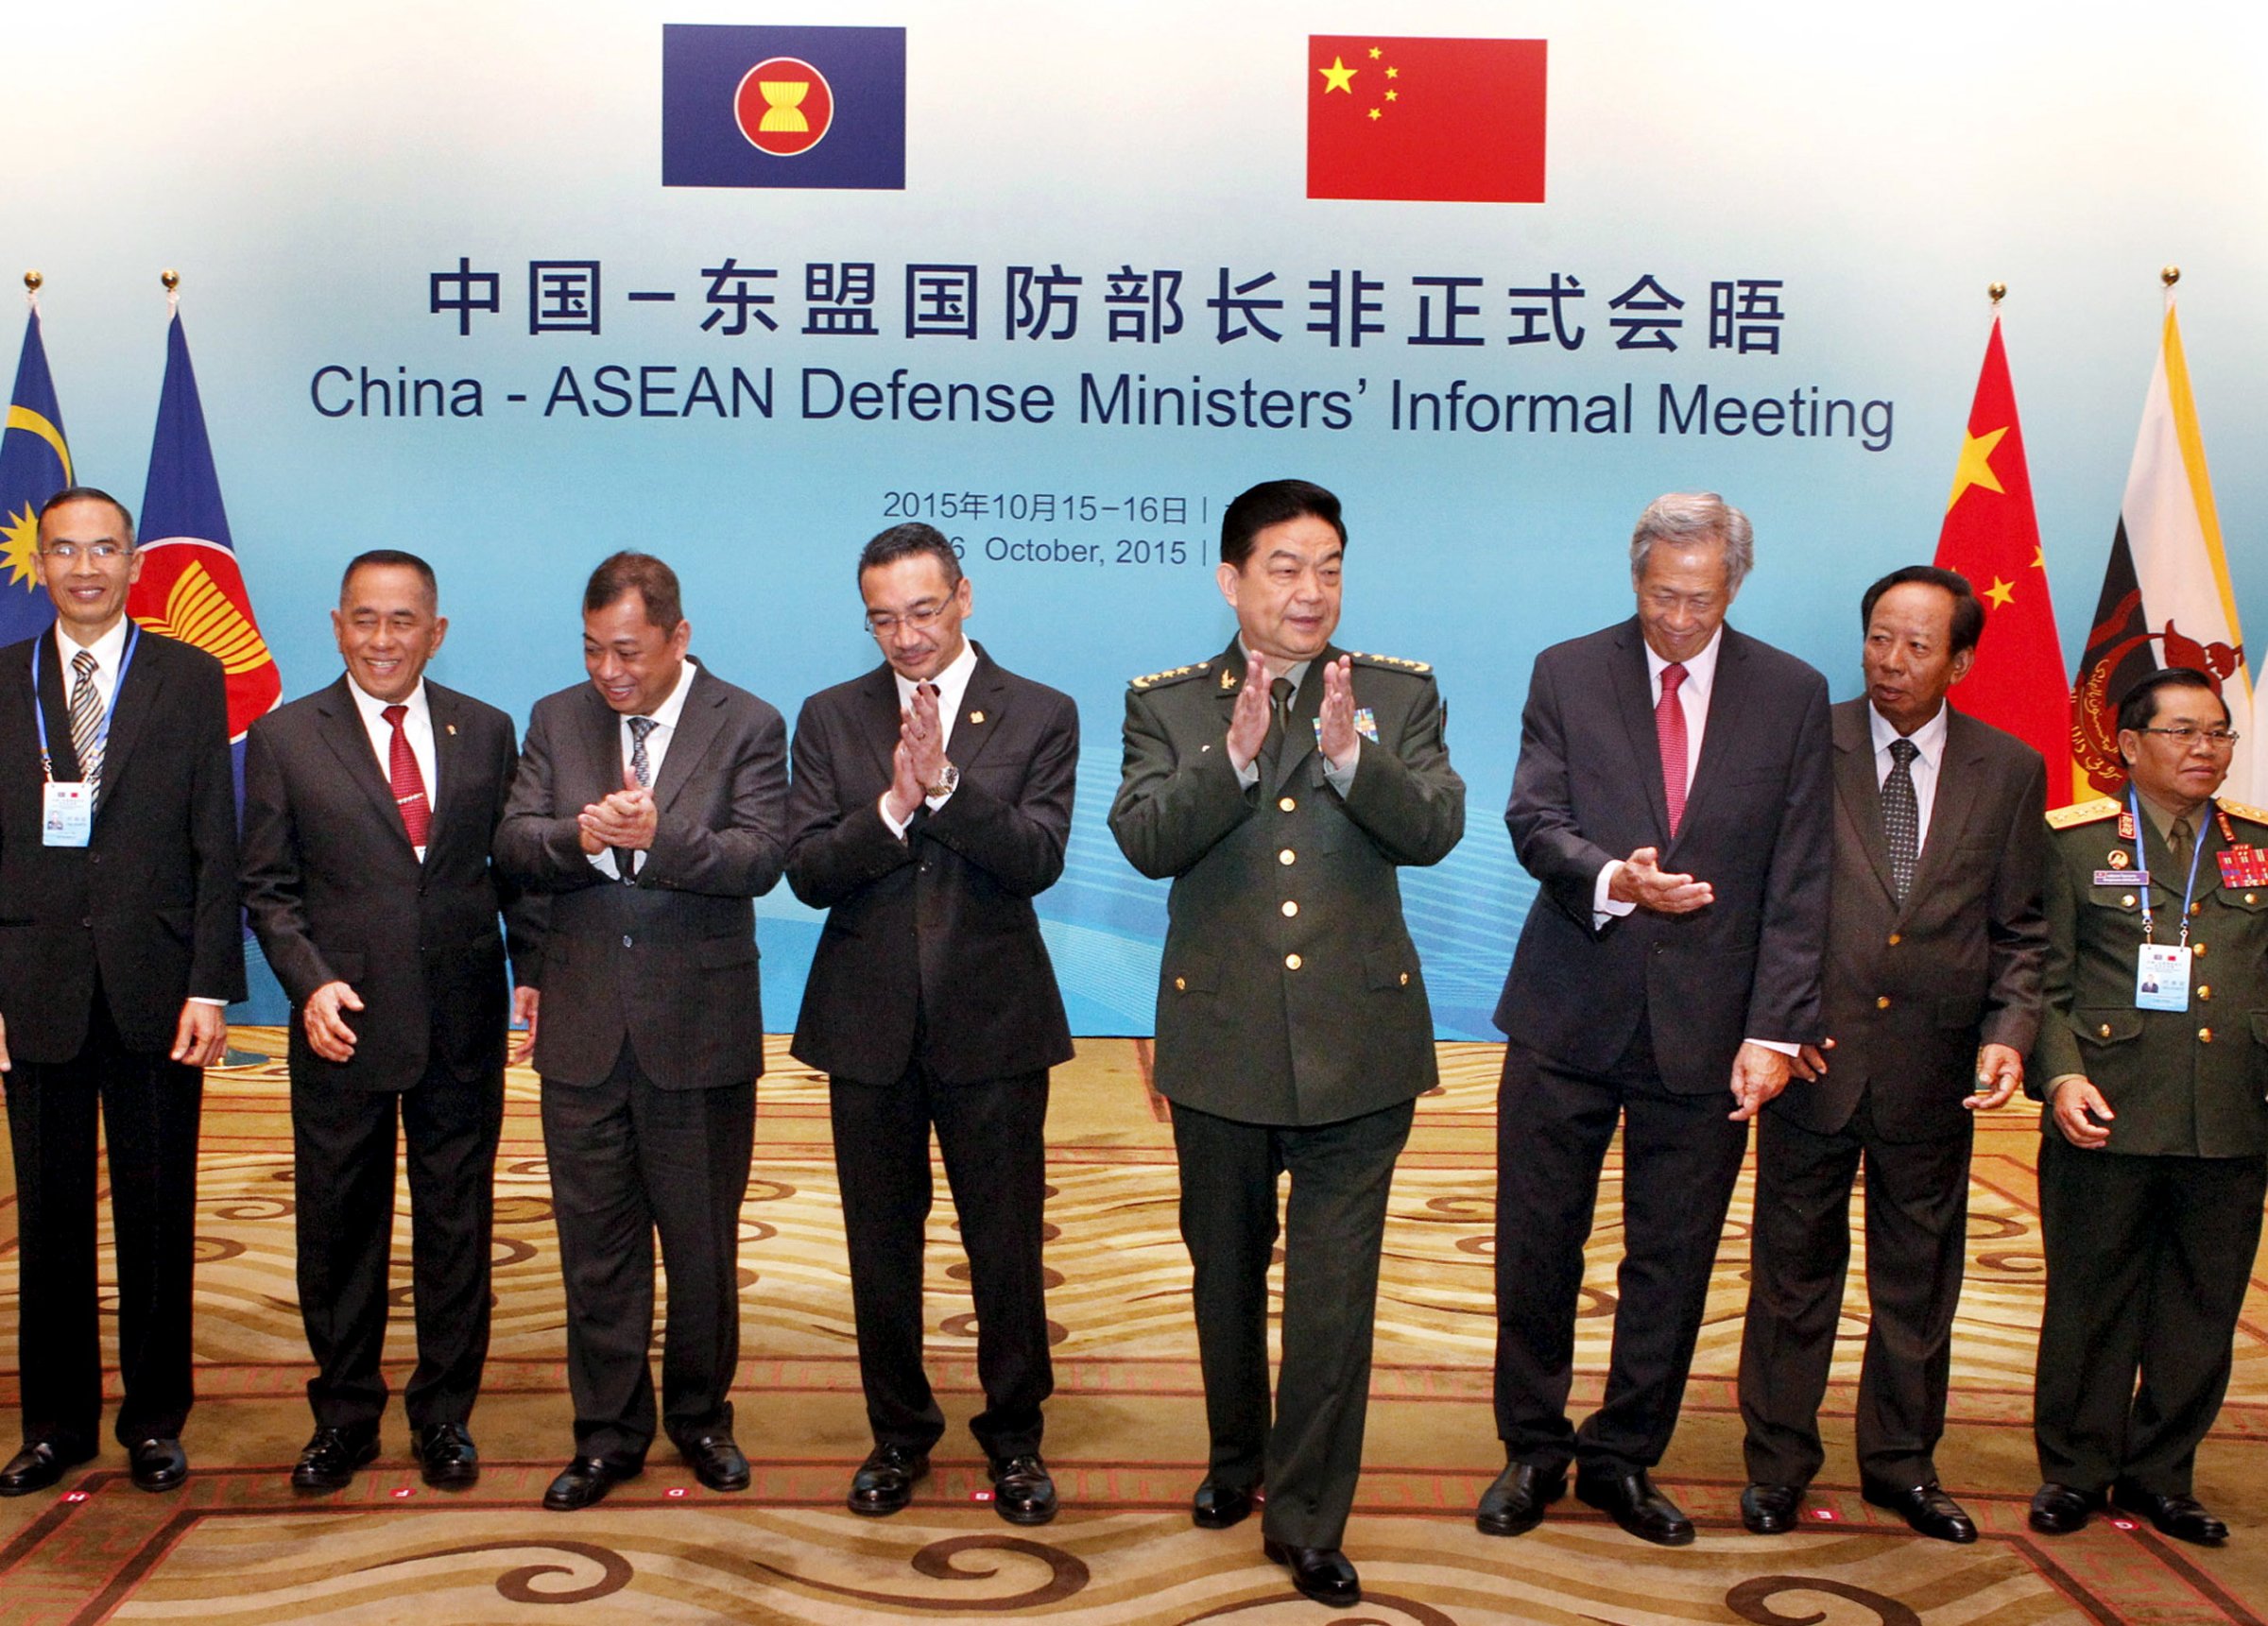 Chinese Defence Minister Chang claps next to his counterparts from South East Asian Nations (ASEAN) during the China-ASEAN Defense Ministers' Informal Meeting in Beijing